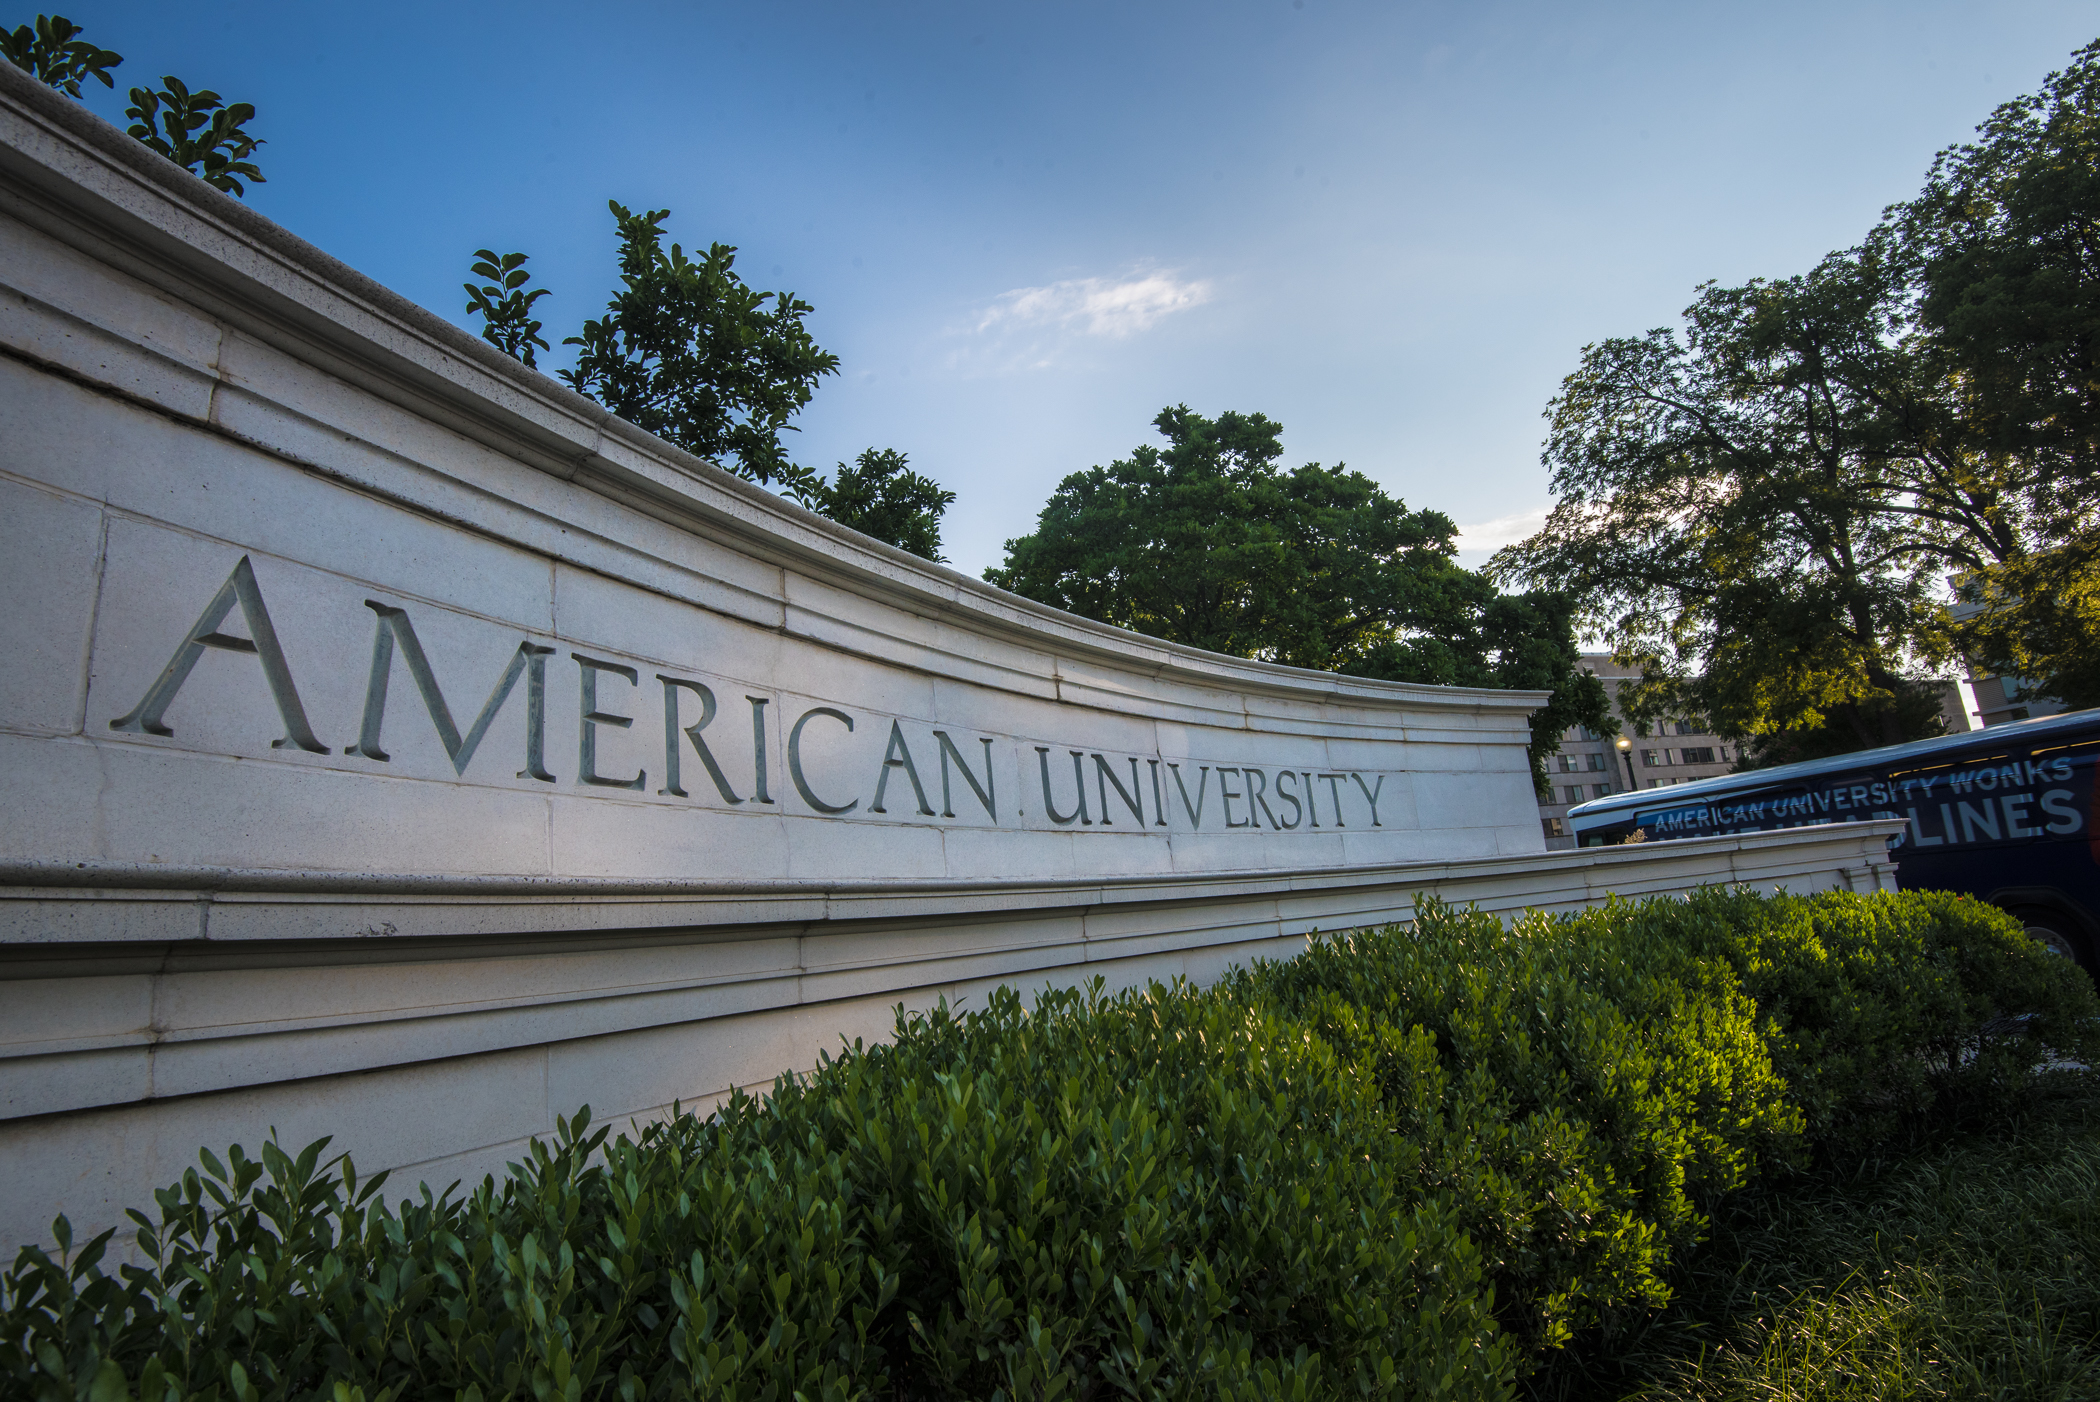 phot of the American University sign at the main campus gate